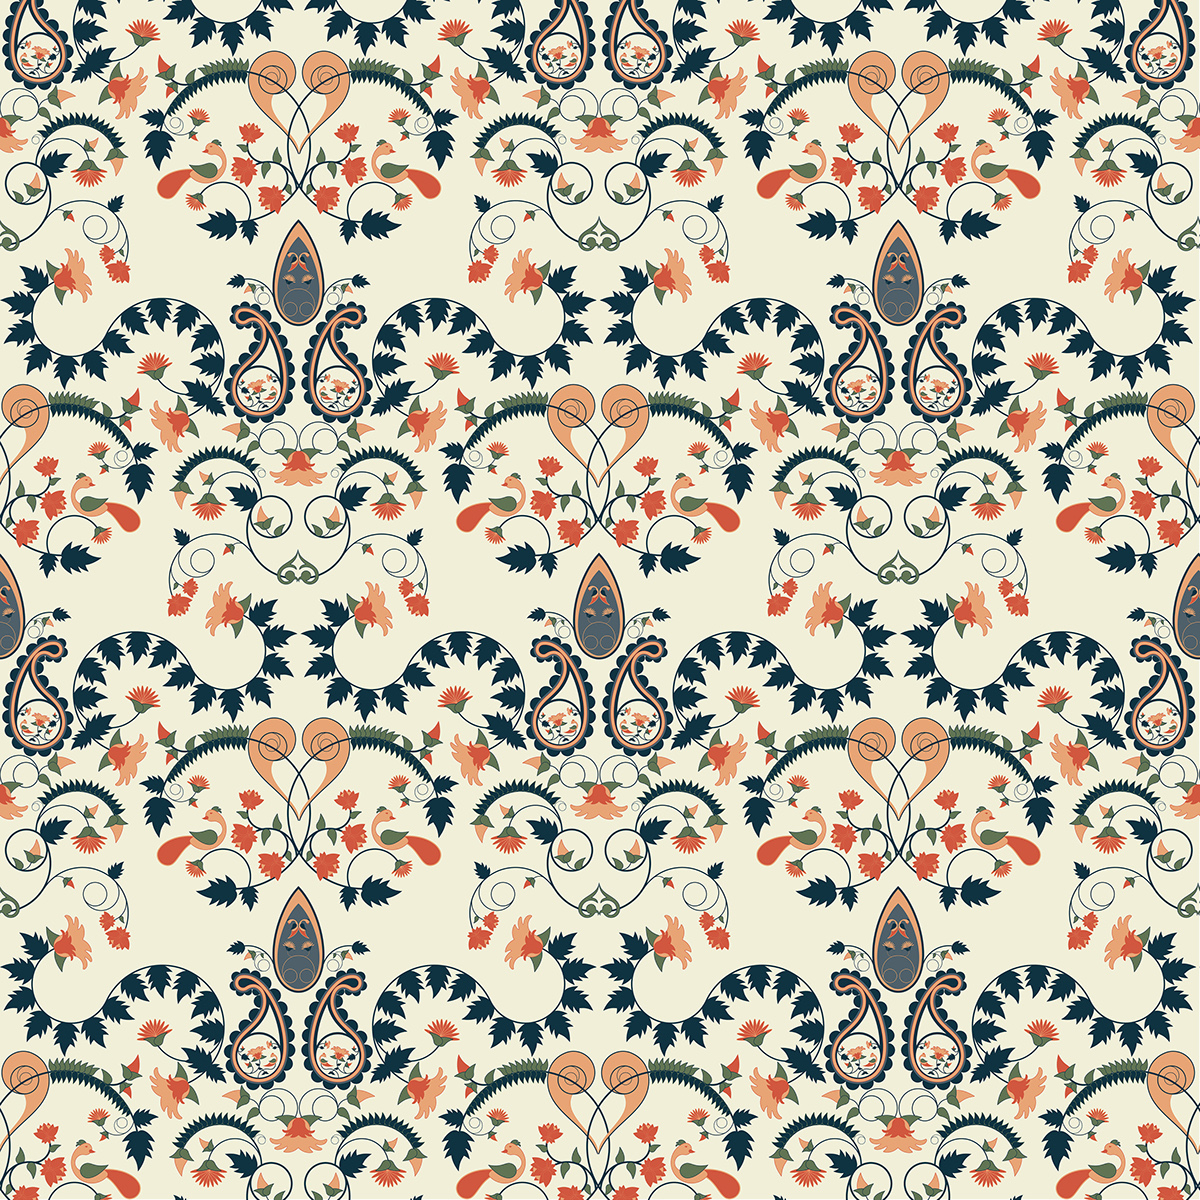 Indian Embroidery Patterns & Design Patterns Inspired From Indian Embroidery Motifs On Behance